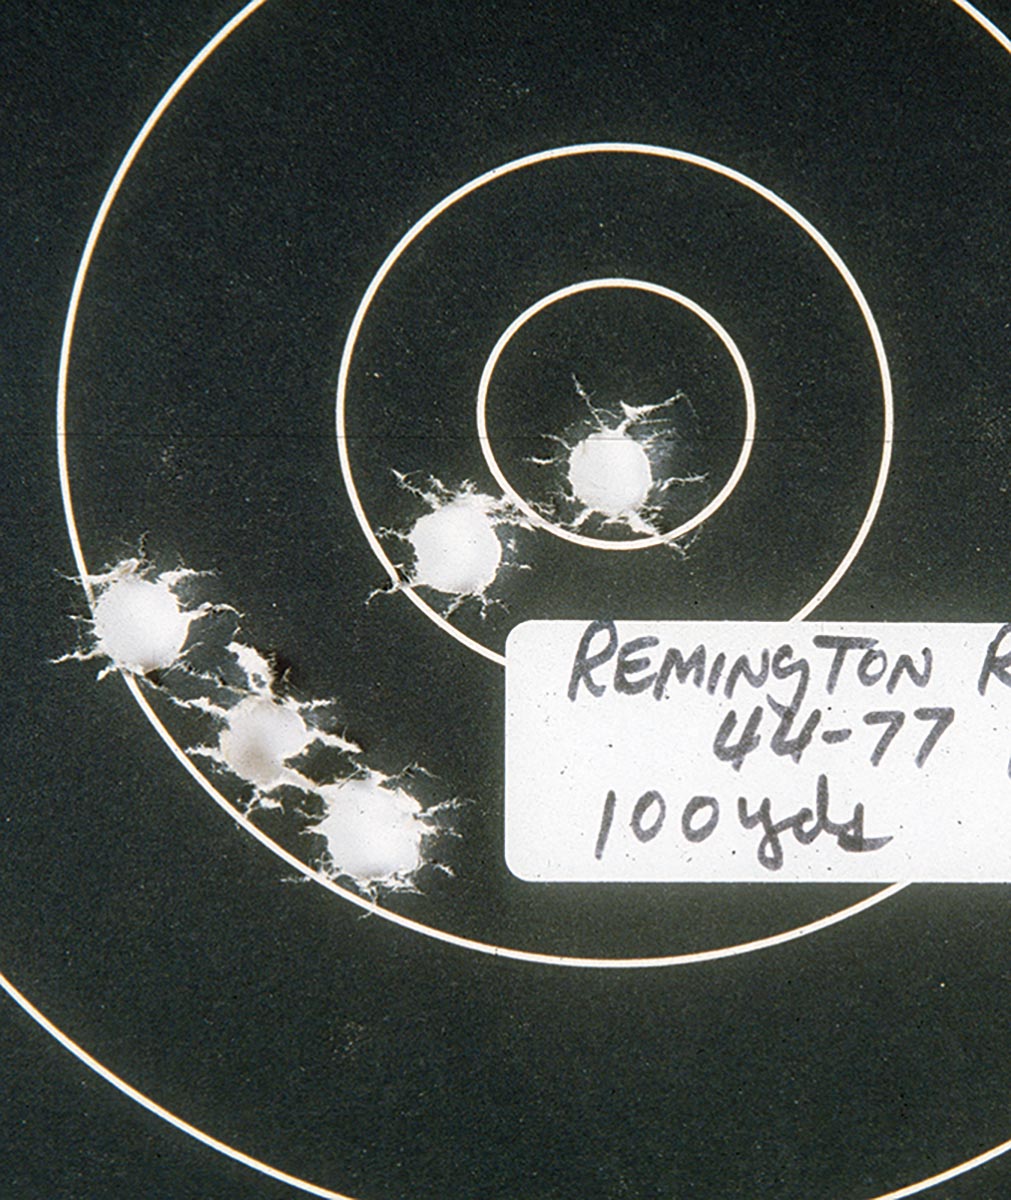 Despite a less-than-perfect bore, a Remington No. 1 rolling block Sporting Rifle is capable of this sort of accuracy with black-powder handloads.